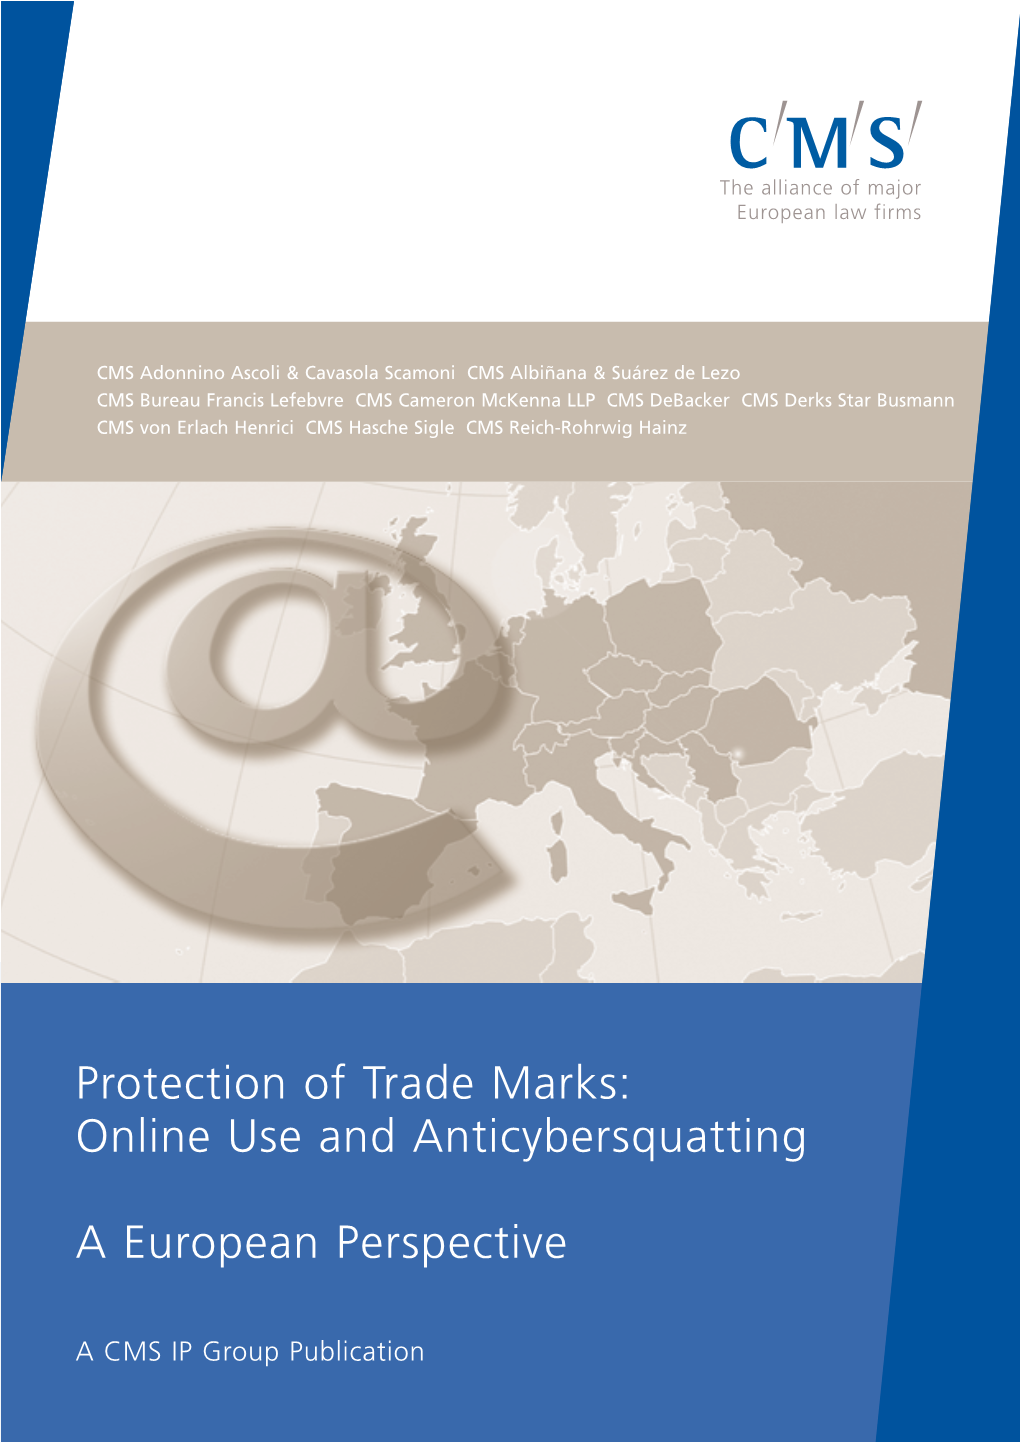 Protection of Trade Marks: Online Use and Anticybersquatting a European Perspective